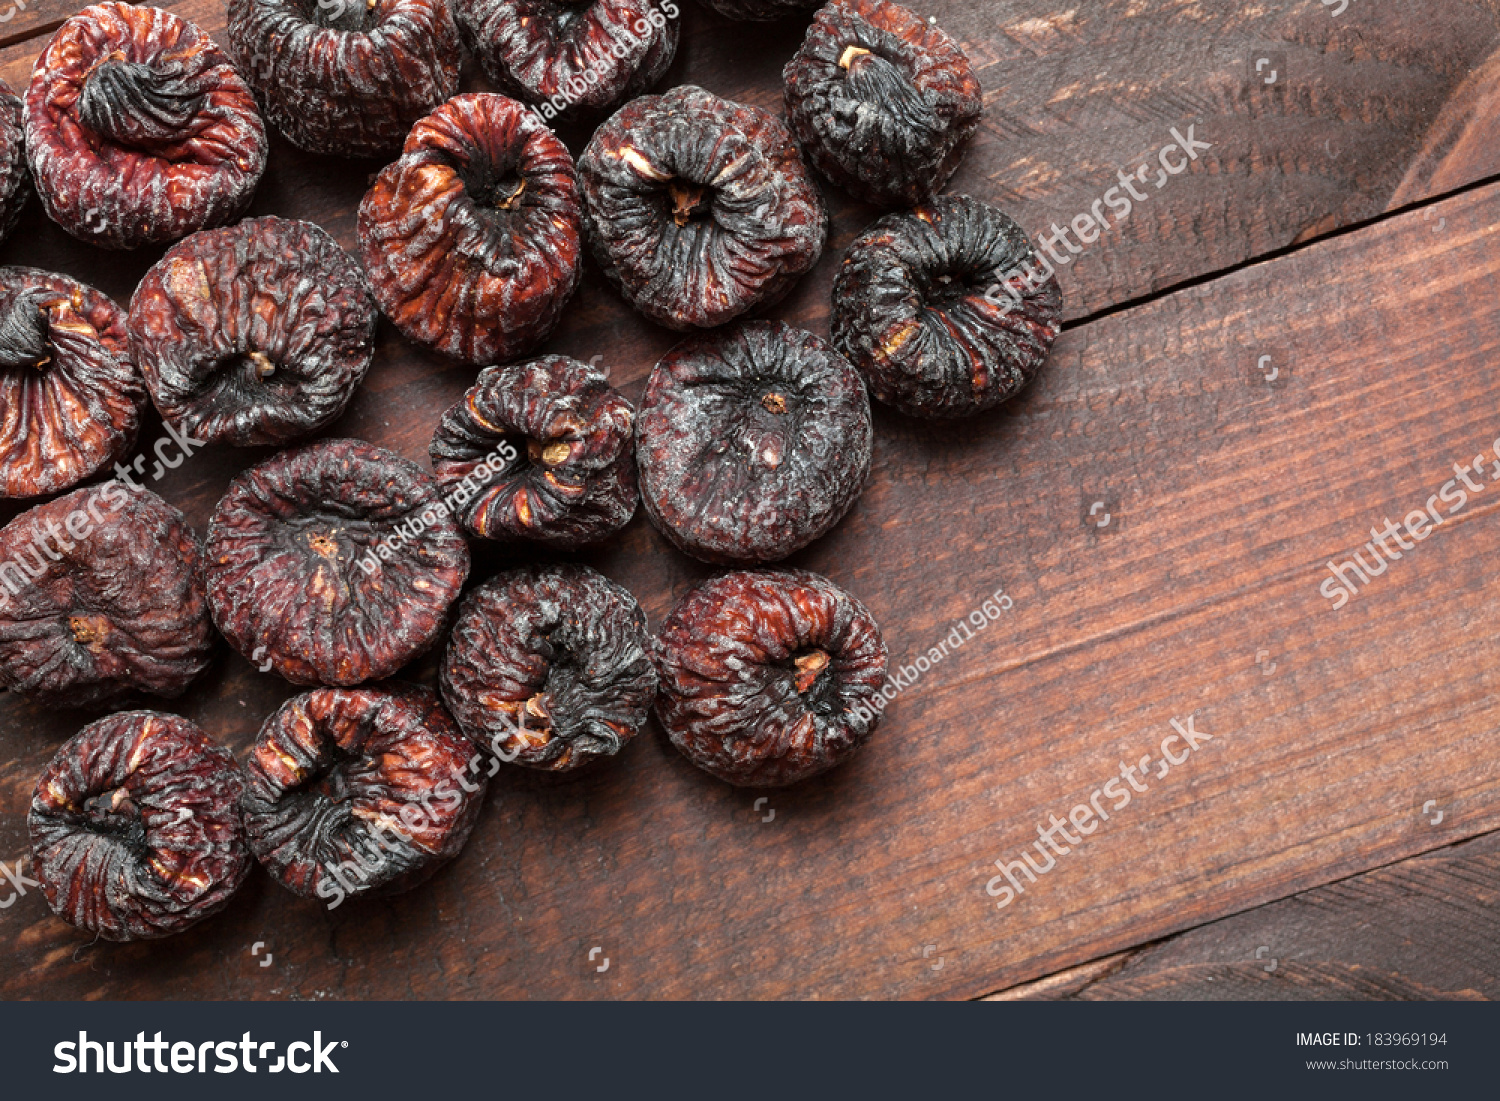 Dried black figs on a wooden surface #183969194